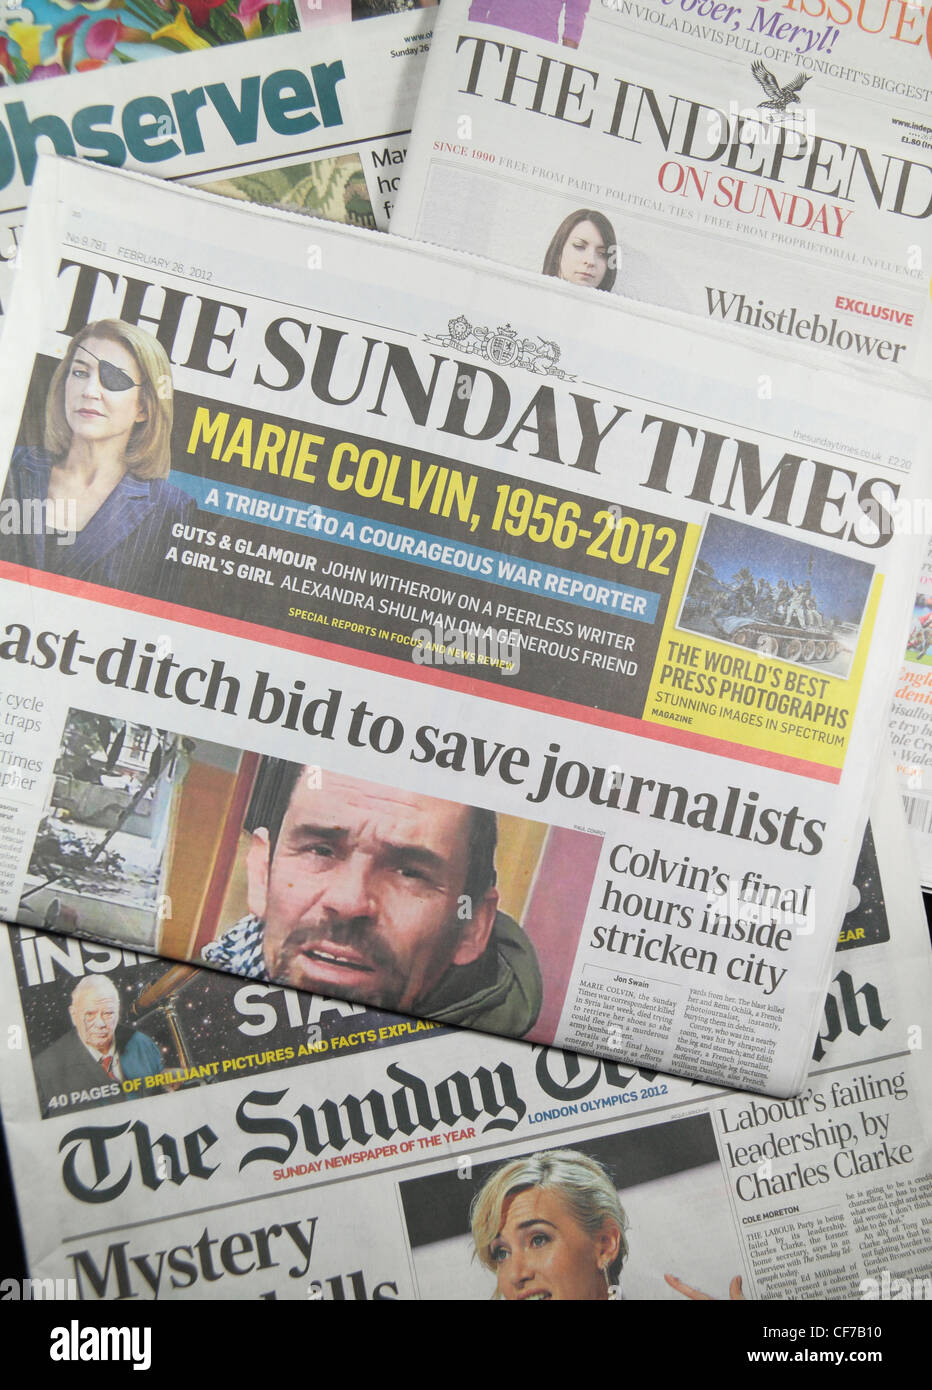 The Sunday Times sitting on the other quality UK national newspapers (The Observer, The Sunday Telegraph, The Independent). Stock Photo